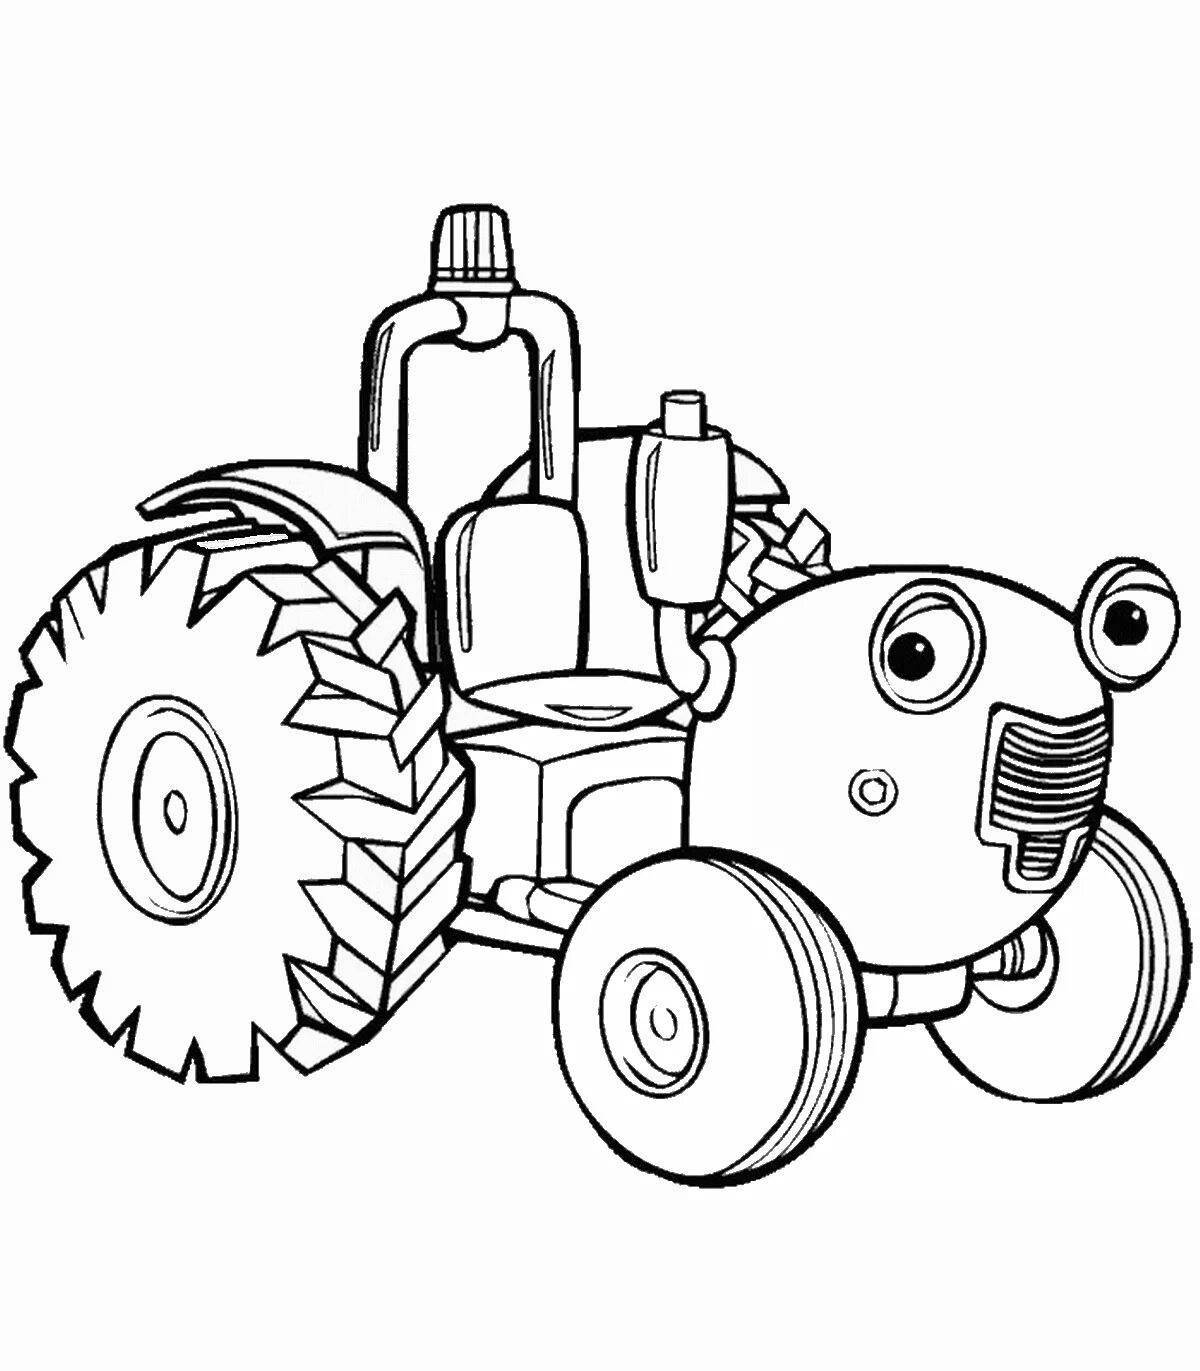 Charming tractor car coloring book